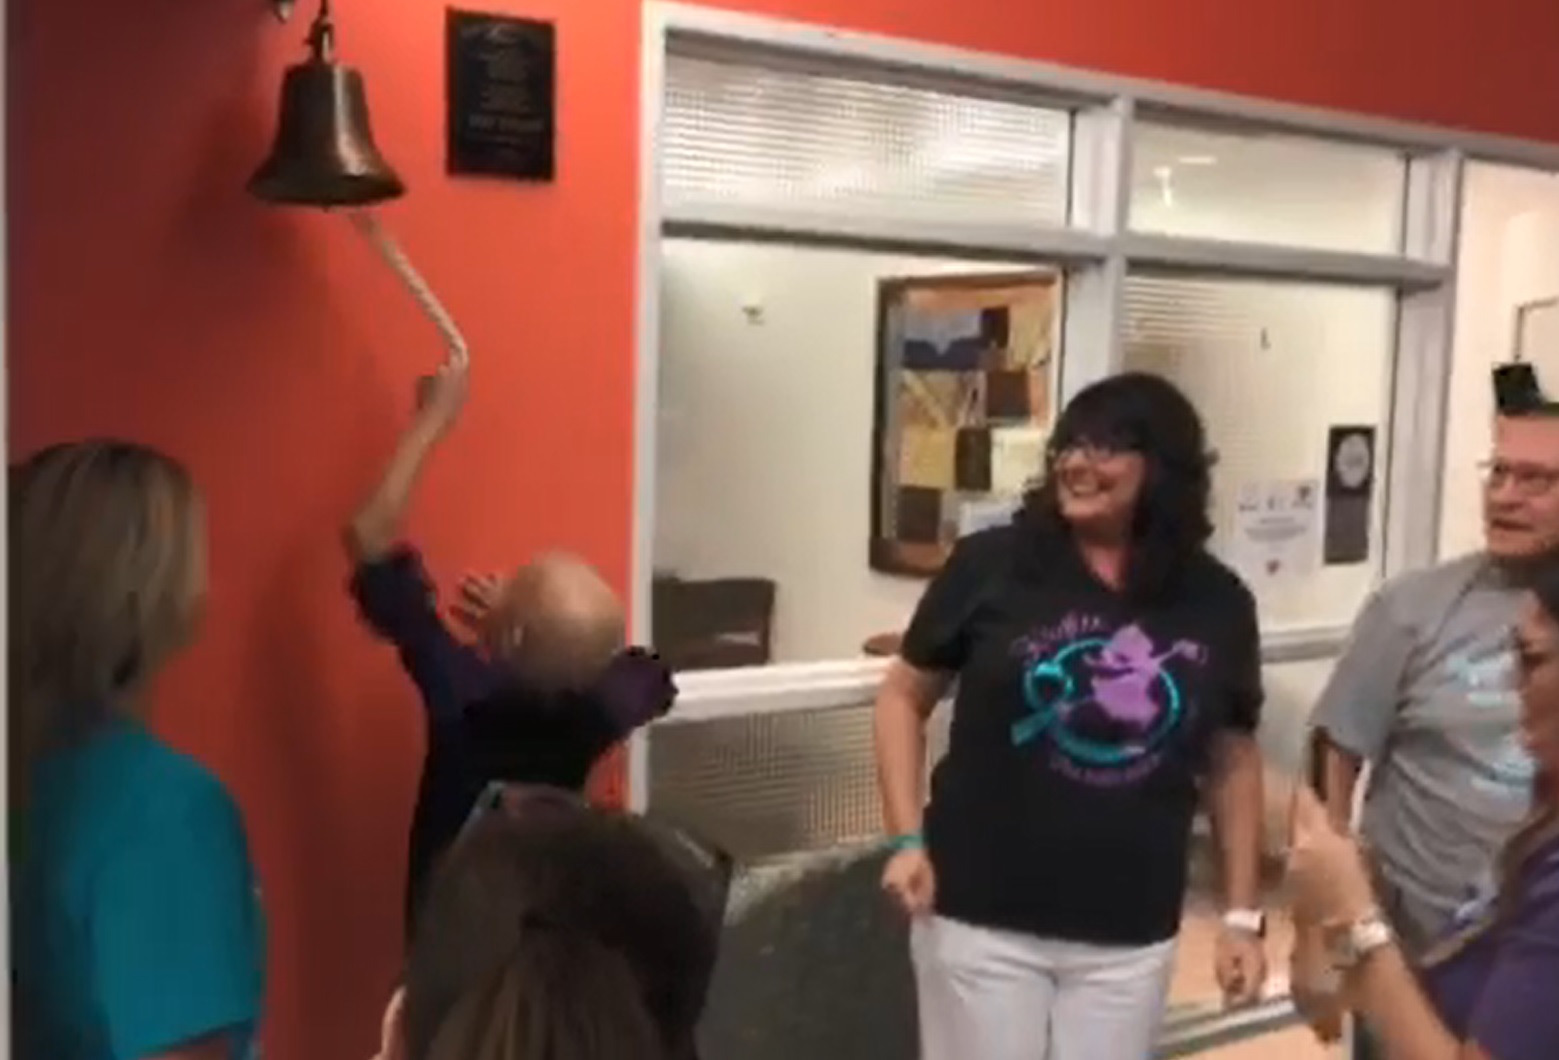 PHOTO: Kaylee Tolleson, 9, ran through a crowd of loved ones at Texas Children's Hospital and rang a bell to celebrate being declared cancer-free after a bout with ovarian cancer.